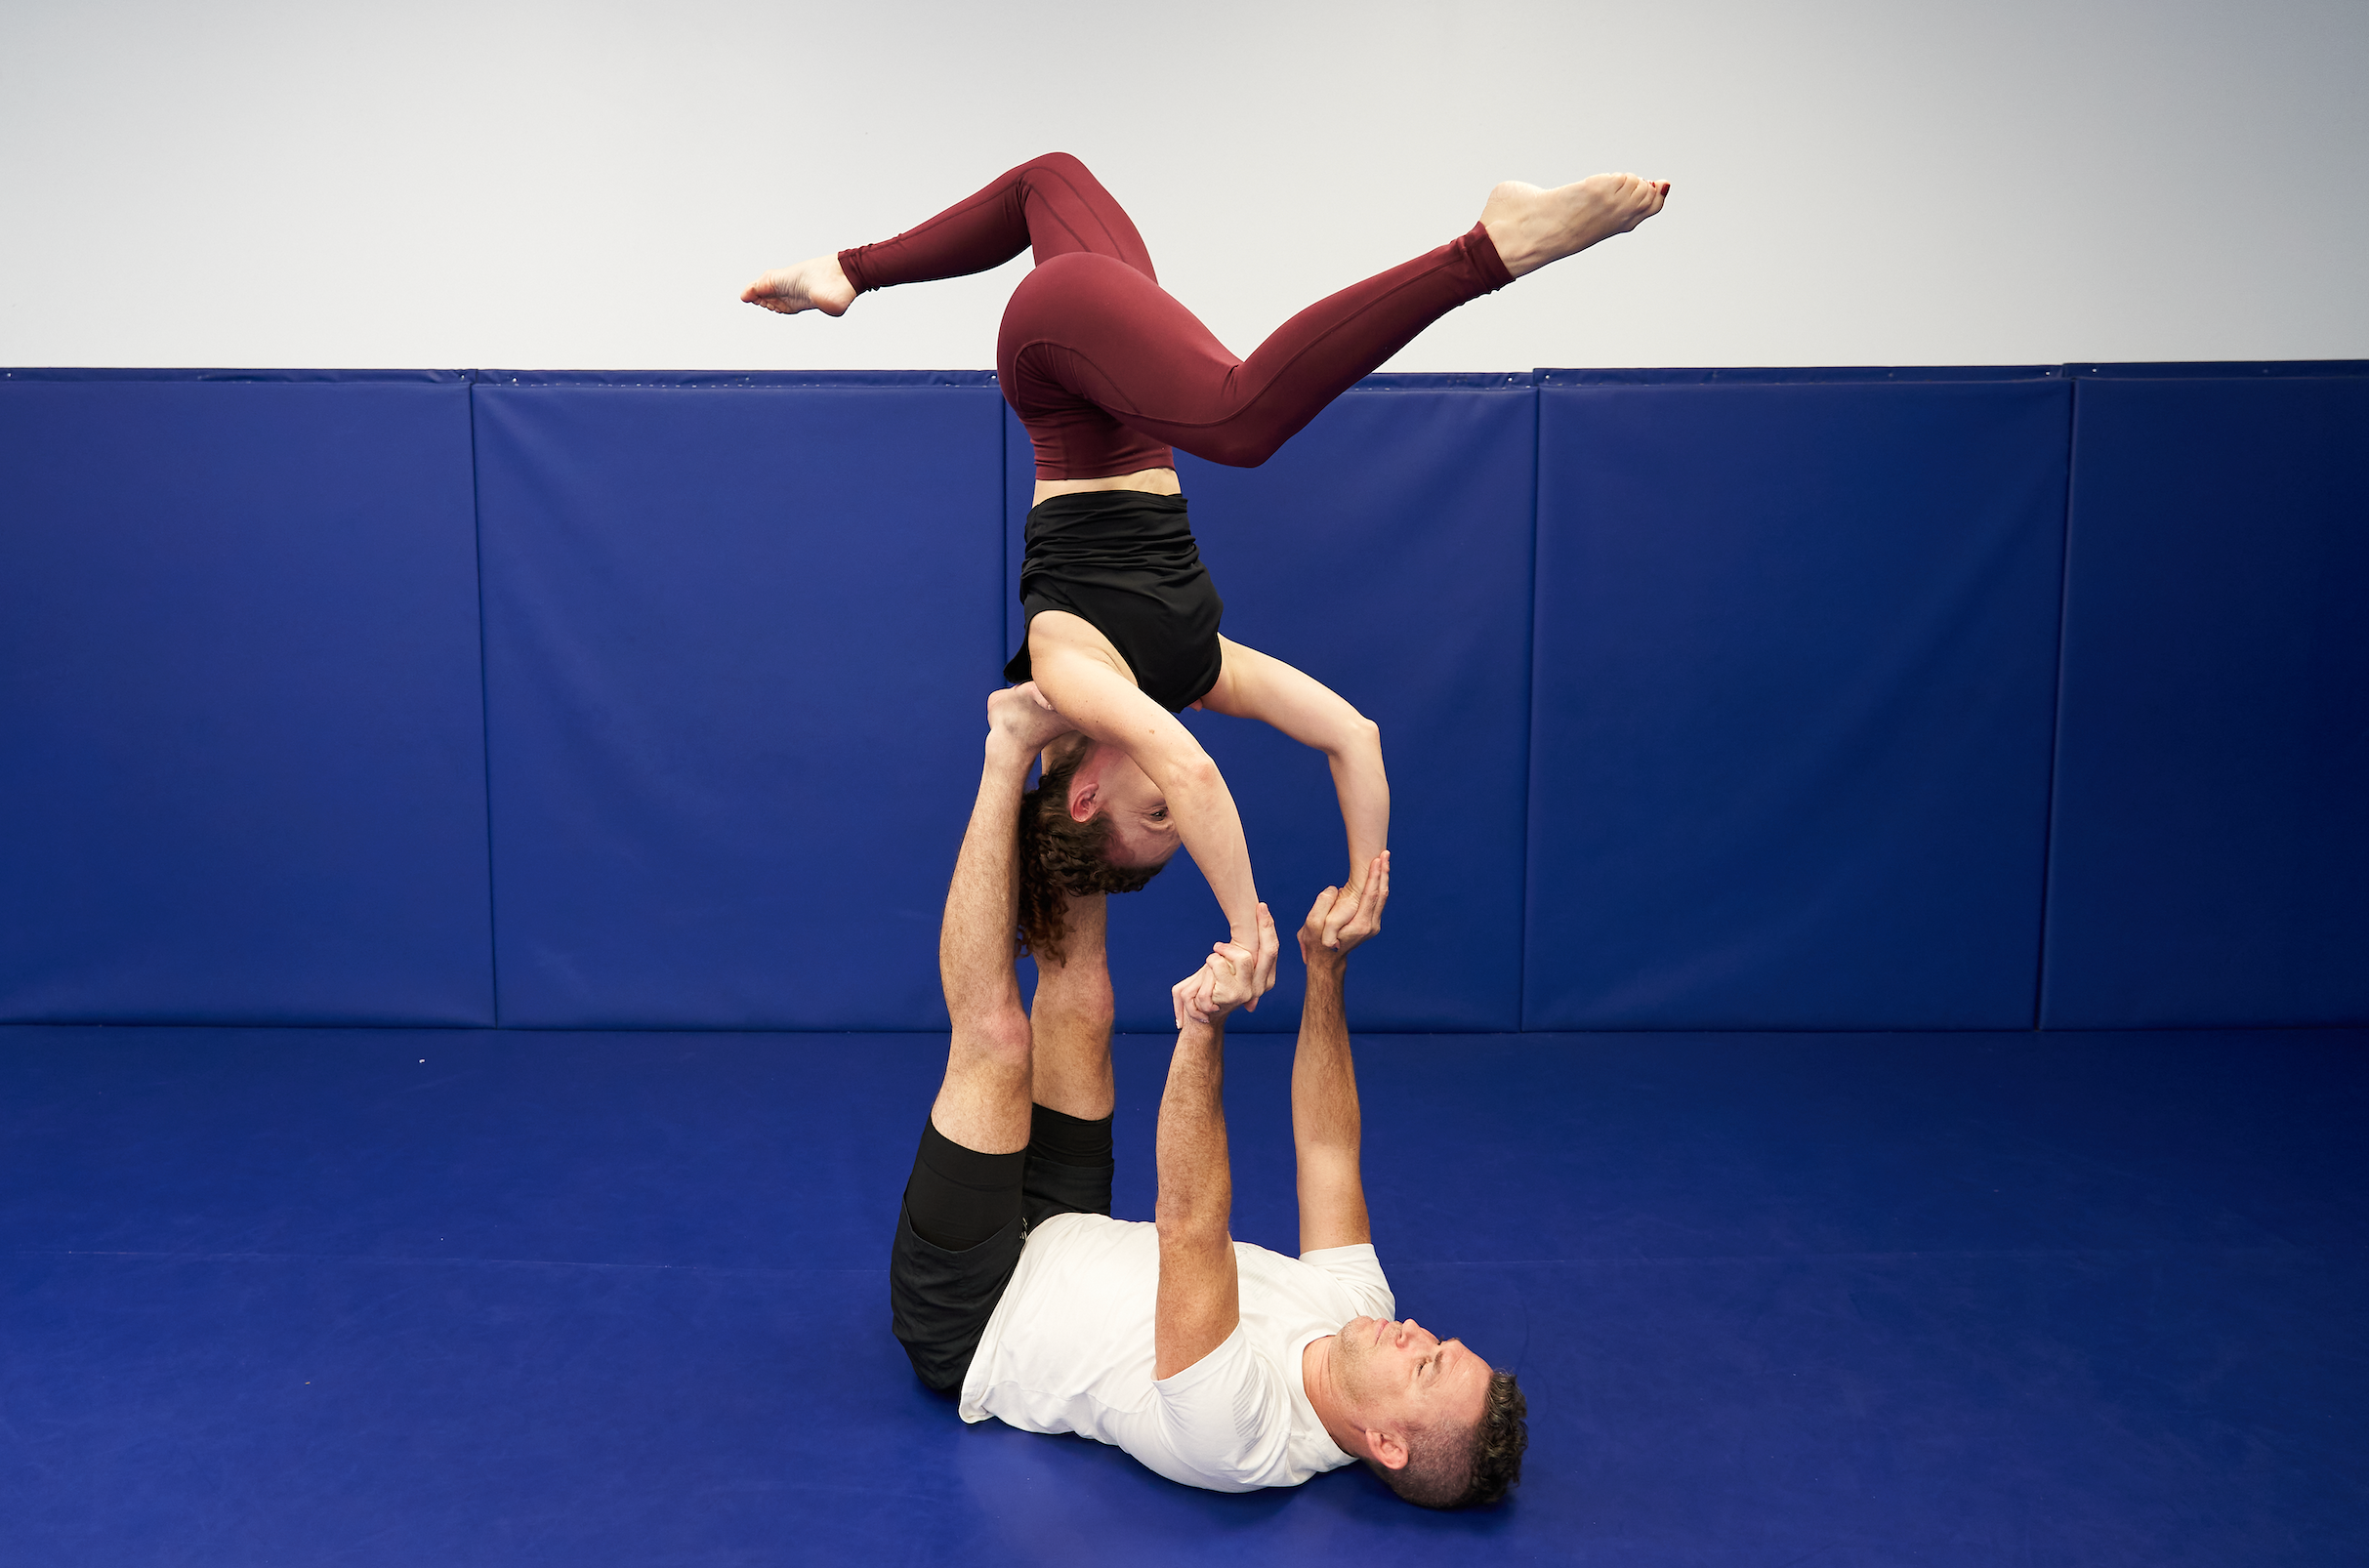 What's the Difference Between Acro Yoga and Partner Yoga? | Kripalu